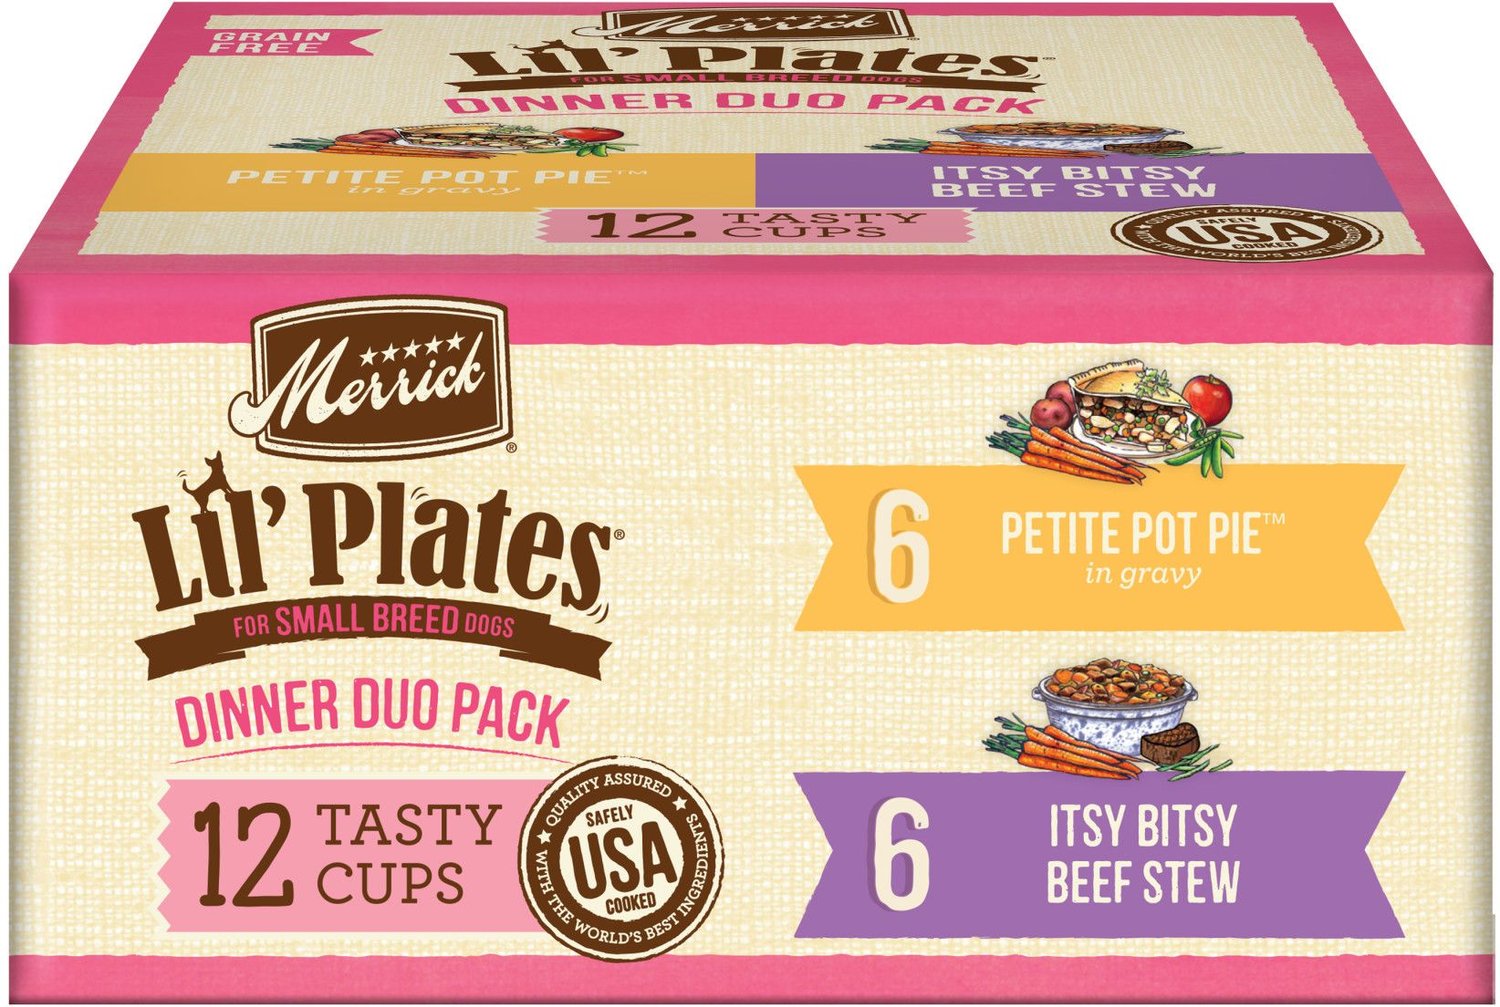 Merrick Lil’ Plates Dinner Duos Itsy Bitsy Beef Stew & Petite Pot Pie Variety Pack Grain-Free Wet Dog Food